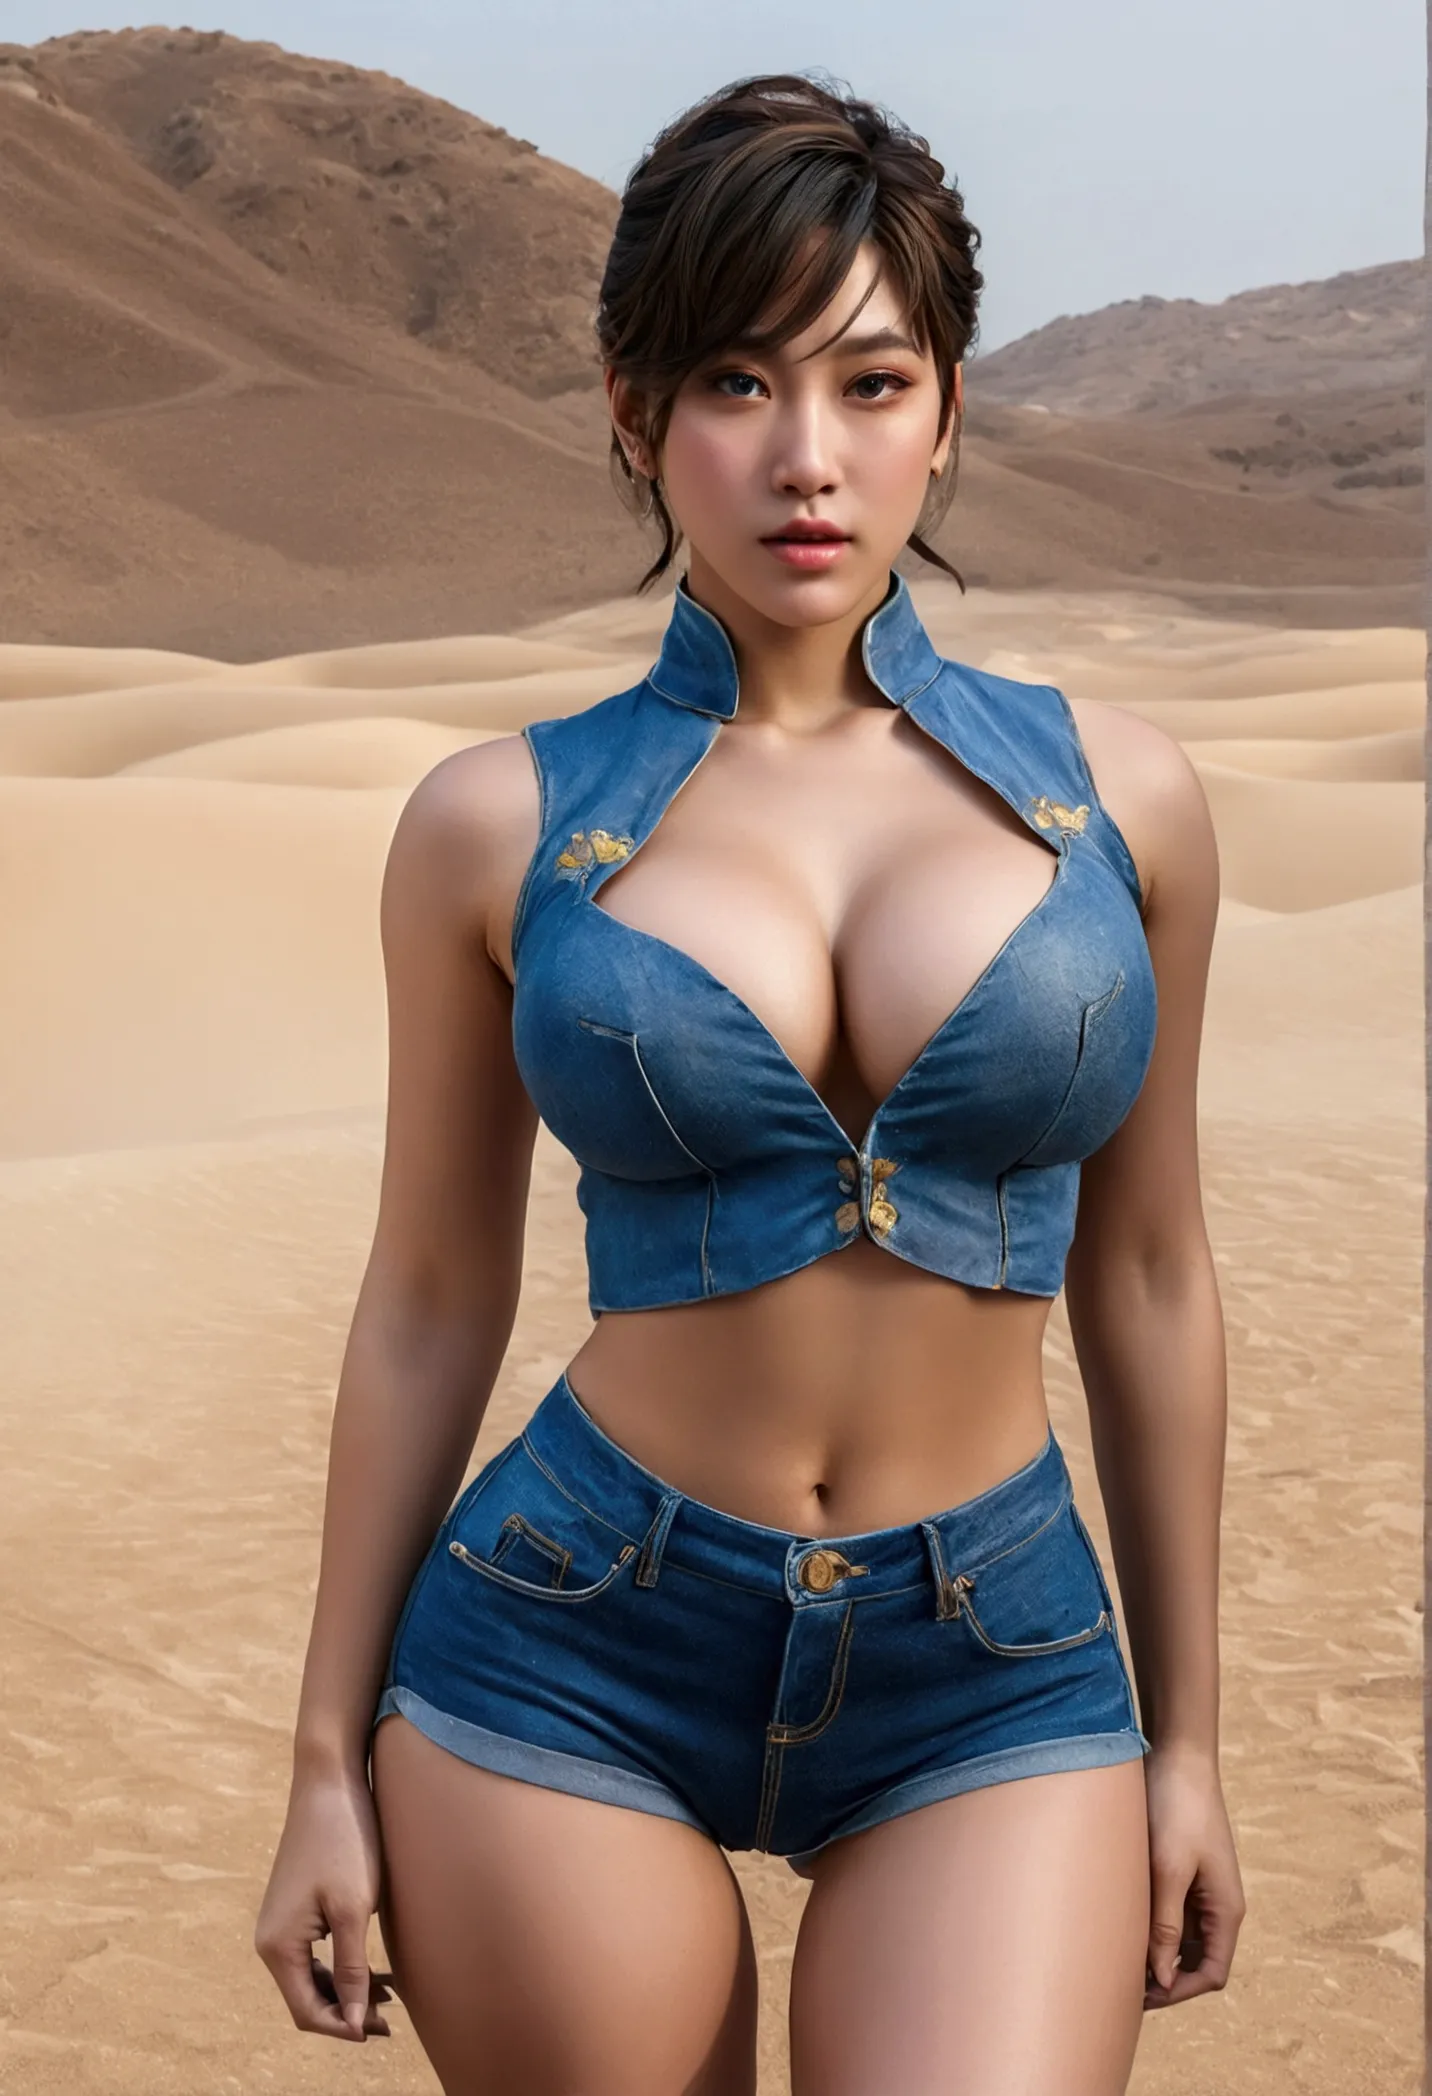 foto realisitic de Chun-Li, perfectbody, Exquisite details. The image must be in high definition. Pay special attention to the f...